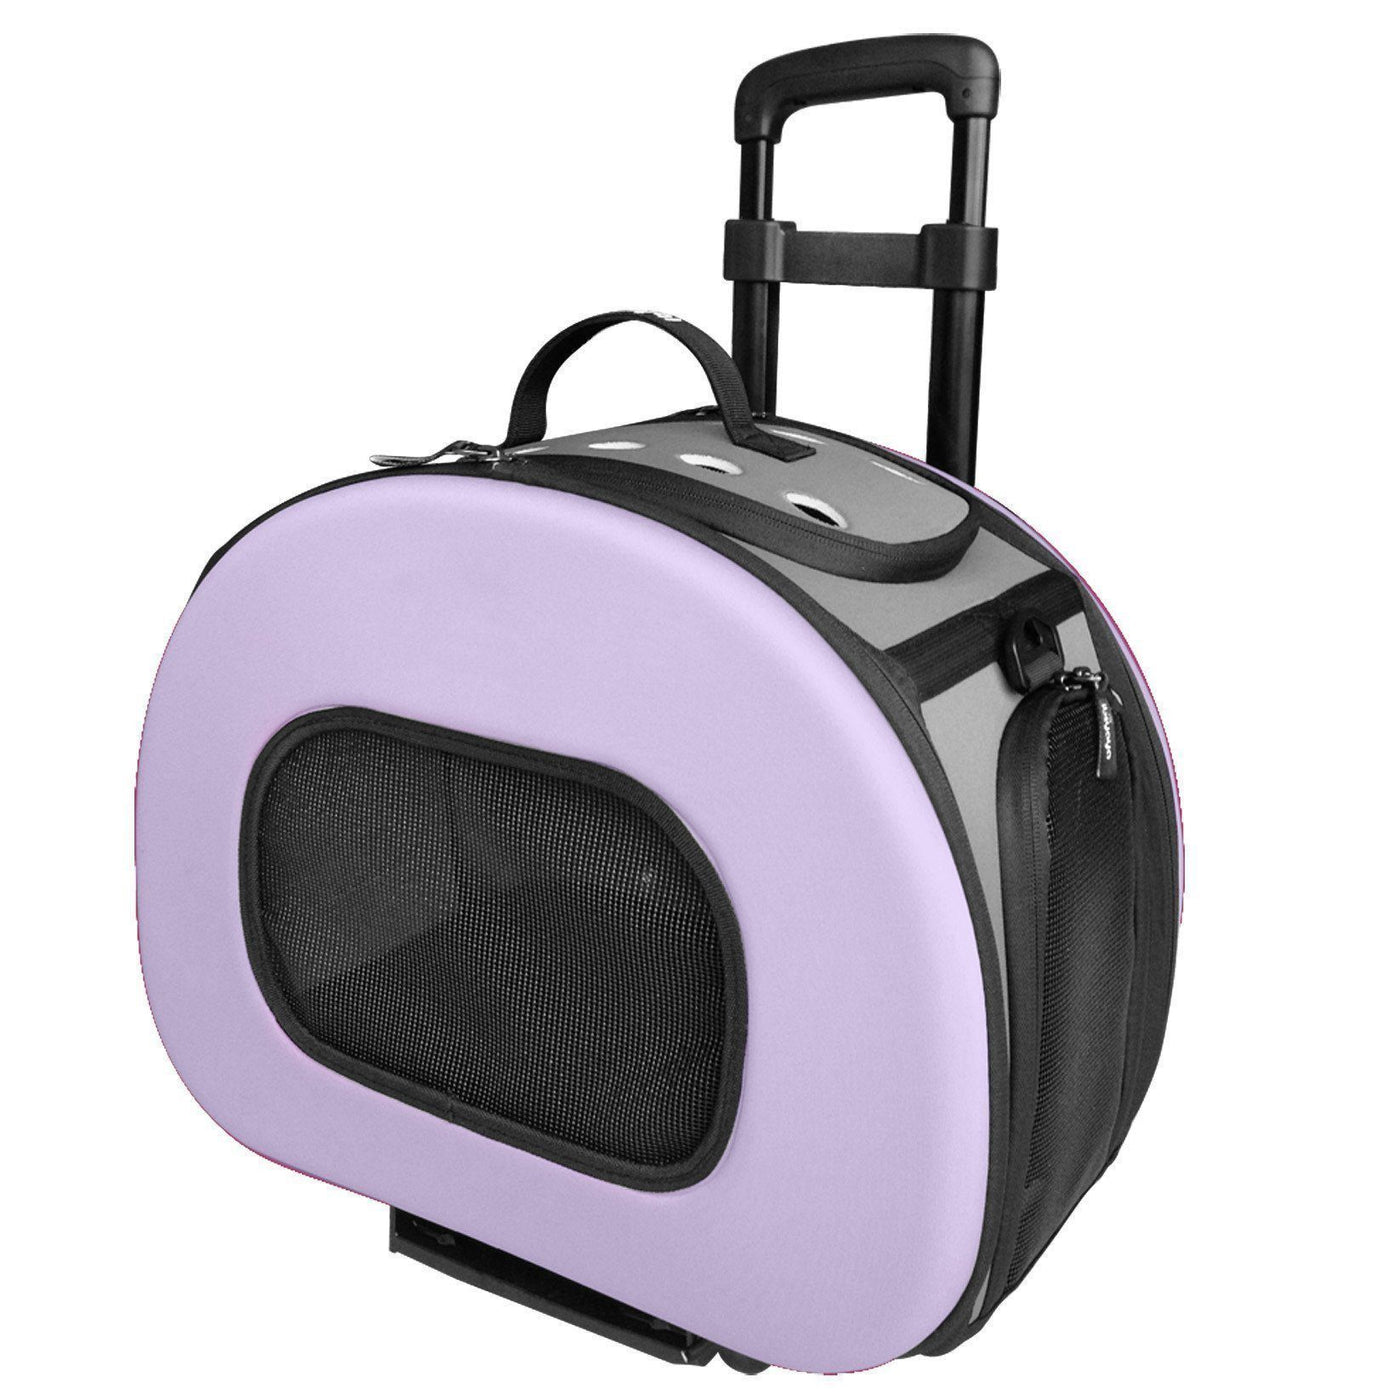 Cat carrier Pet bag Ventilated Safe Foldable Travel on plane Puppy